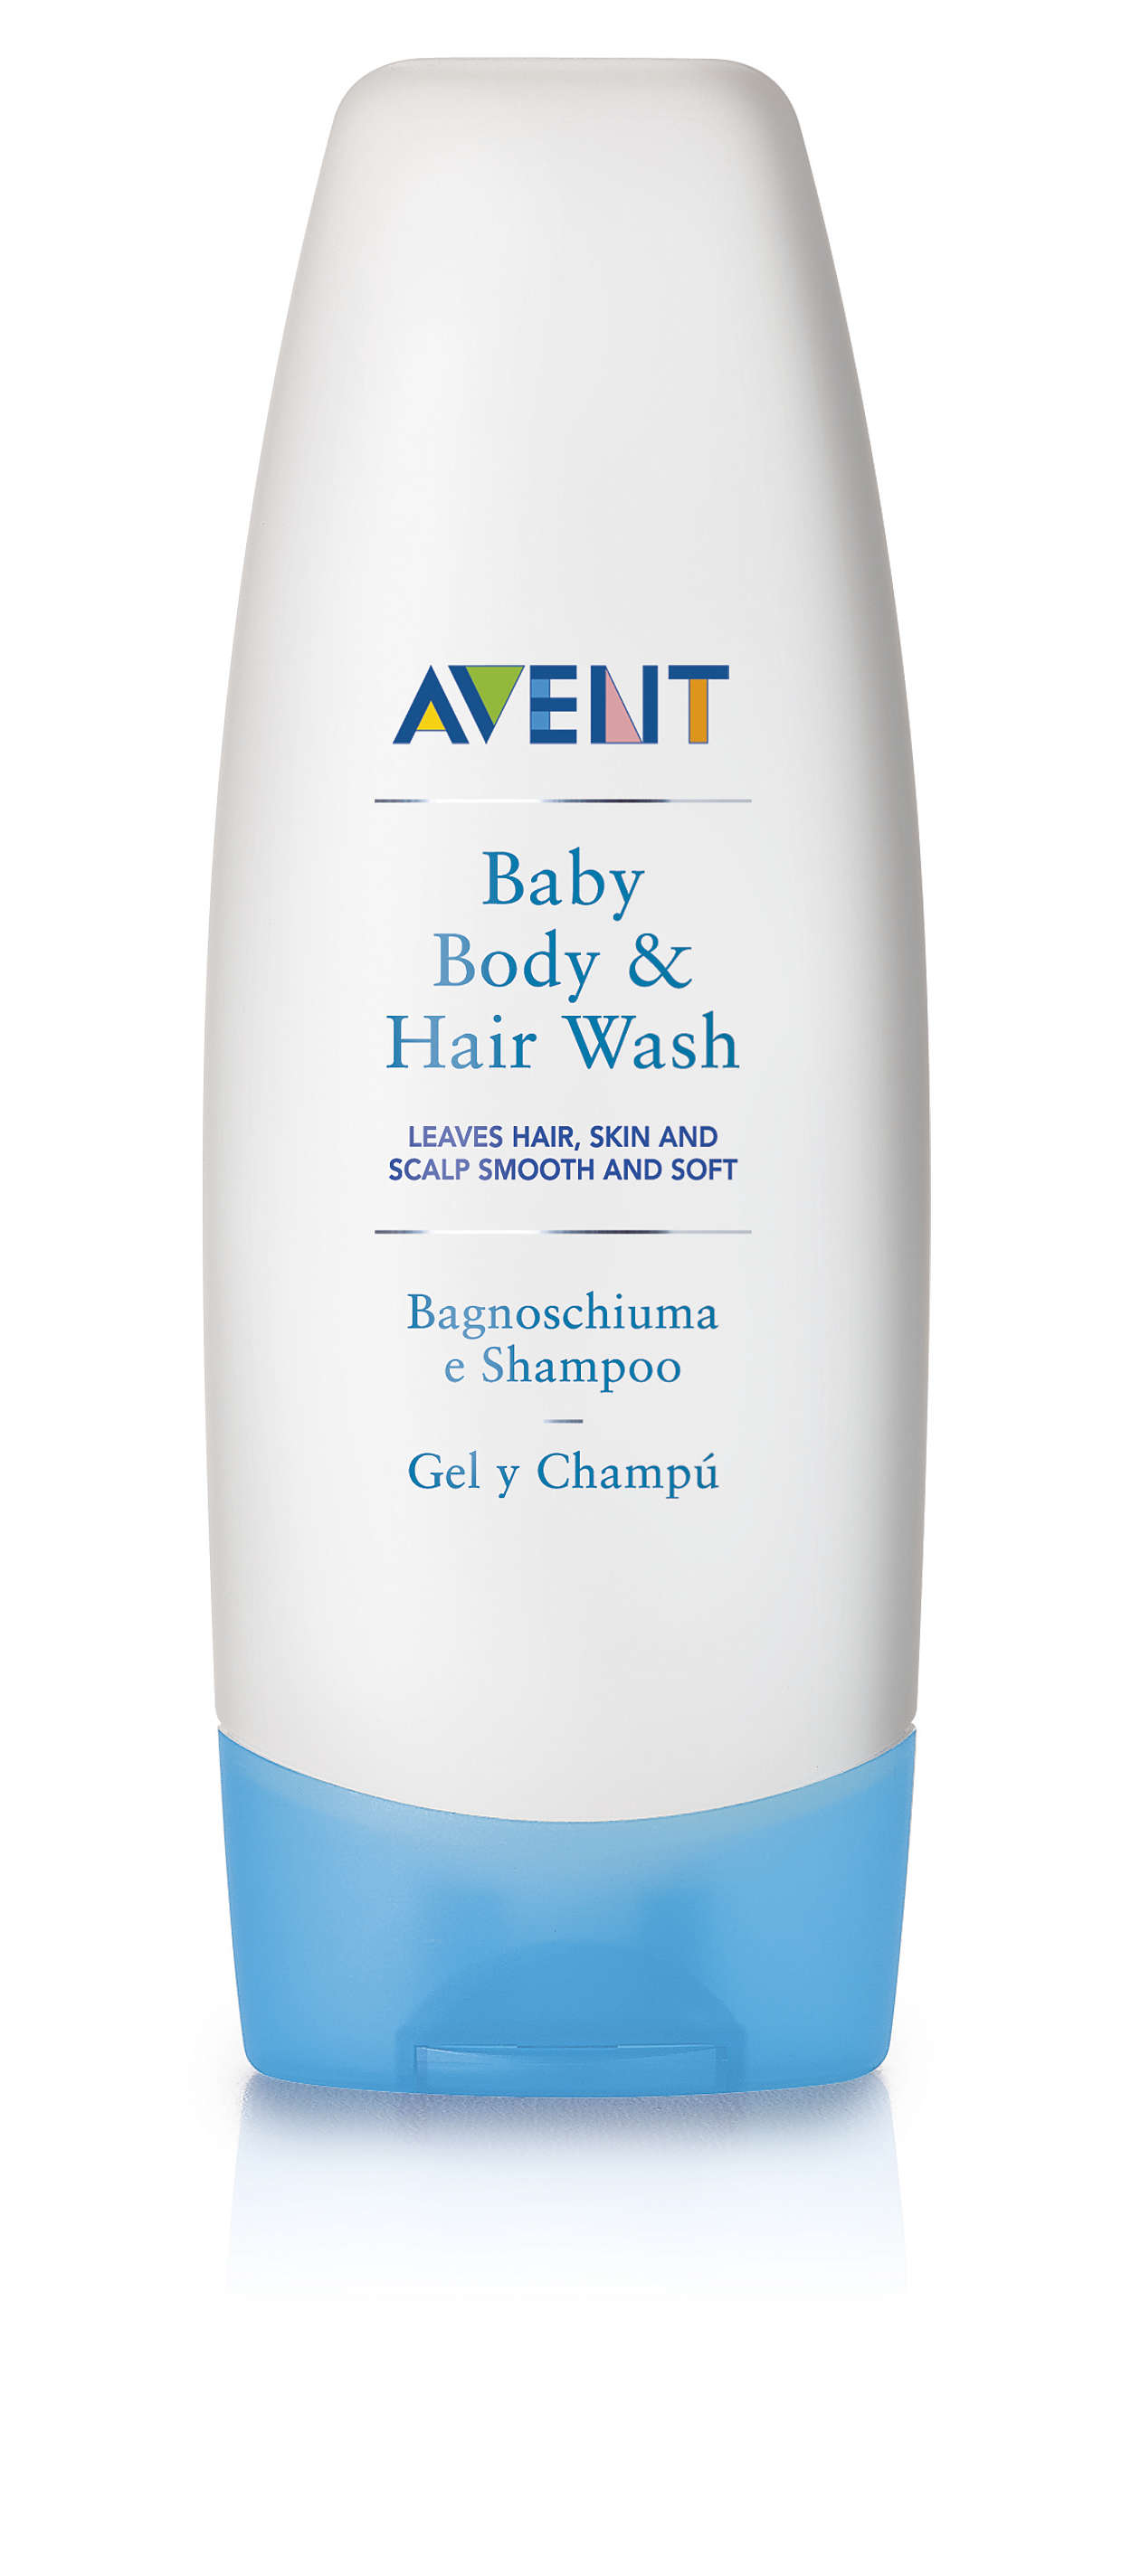 Leaves hair, skin and scalp smooth and soft